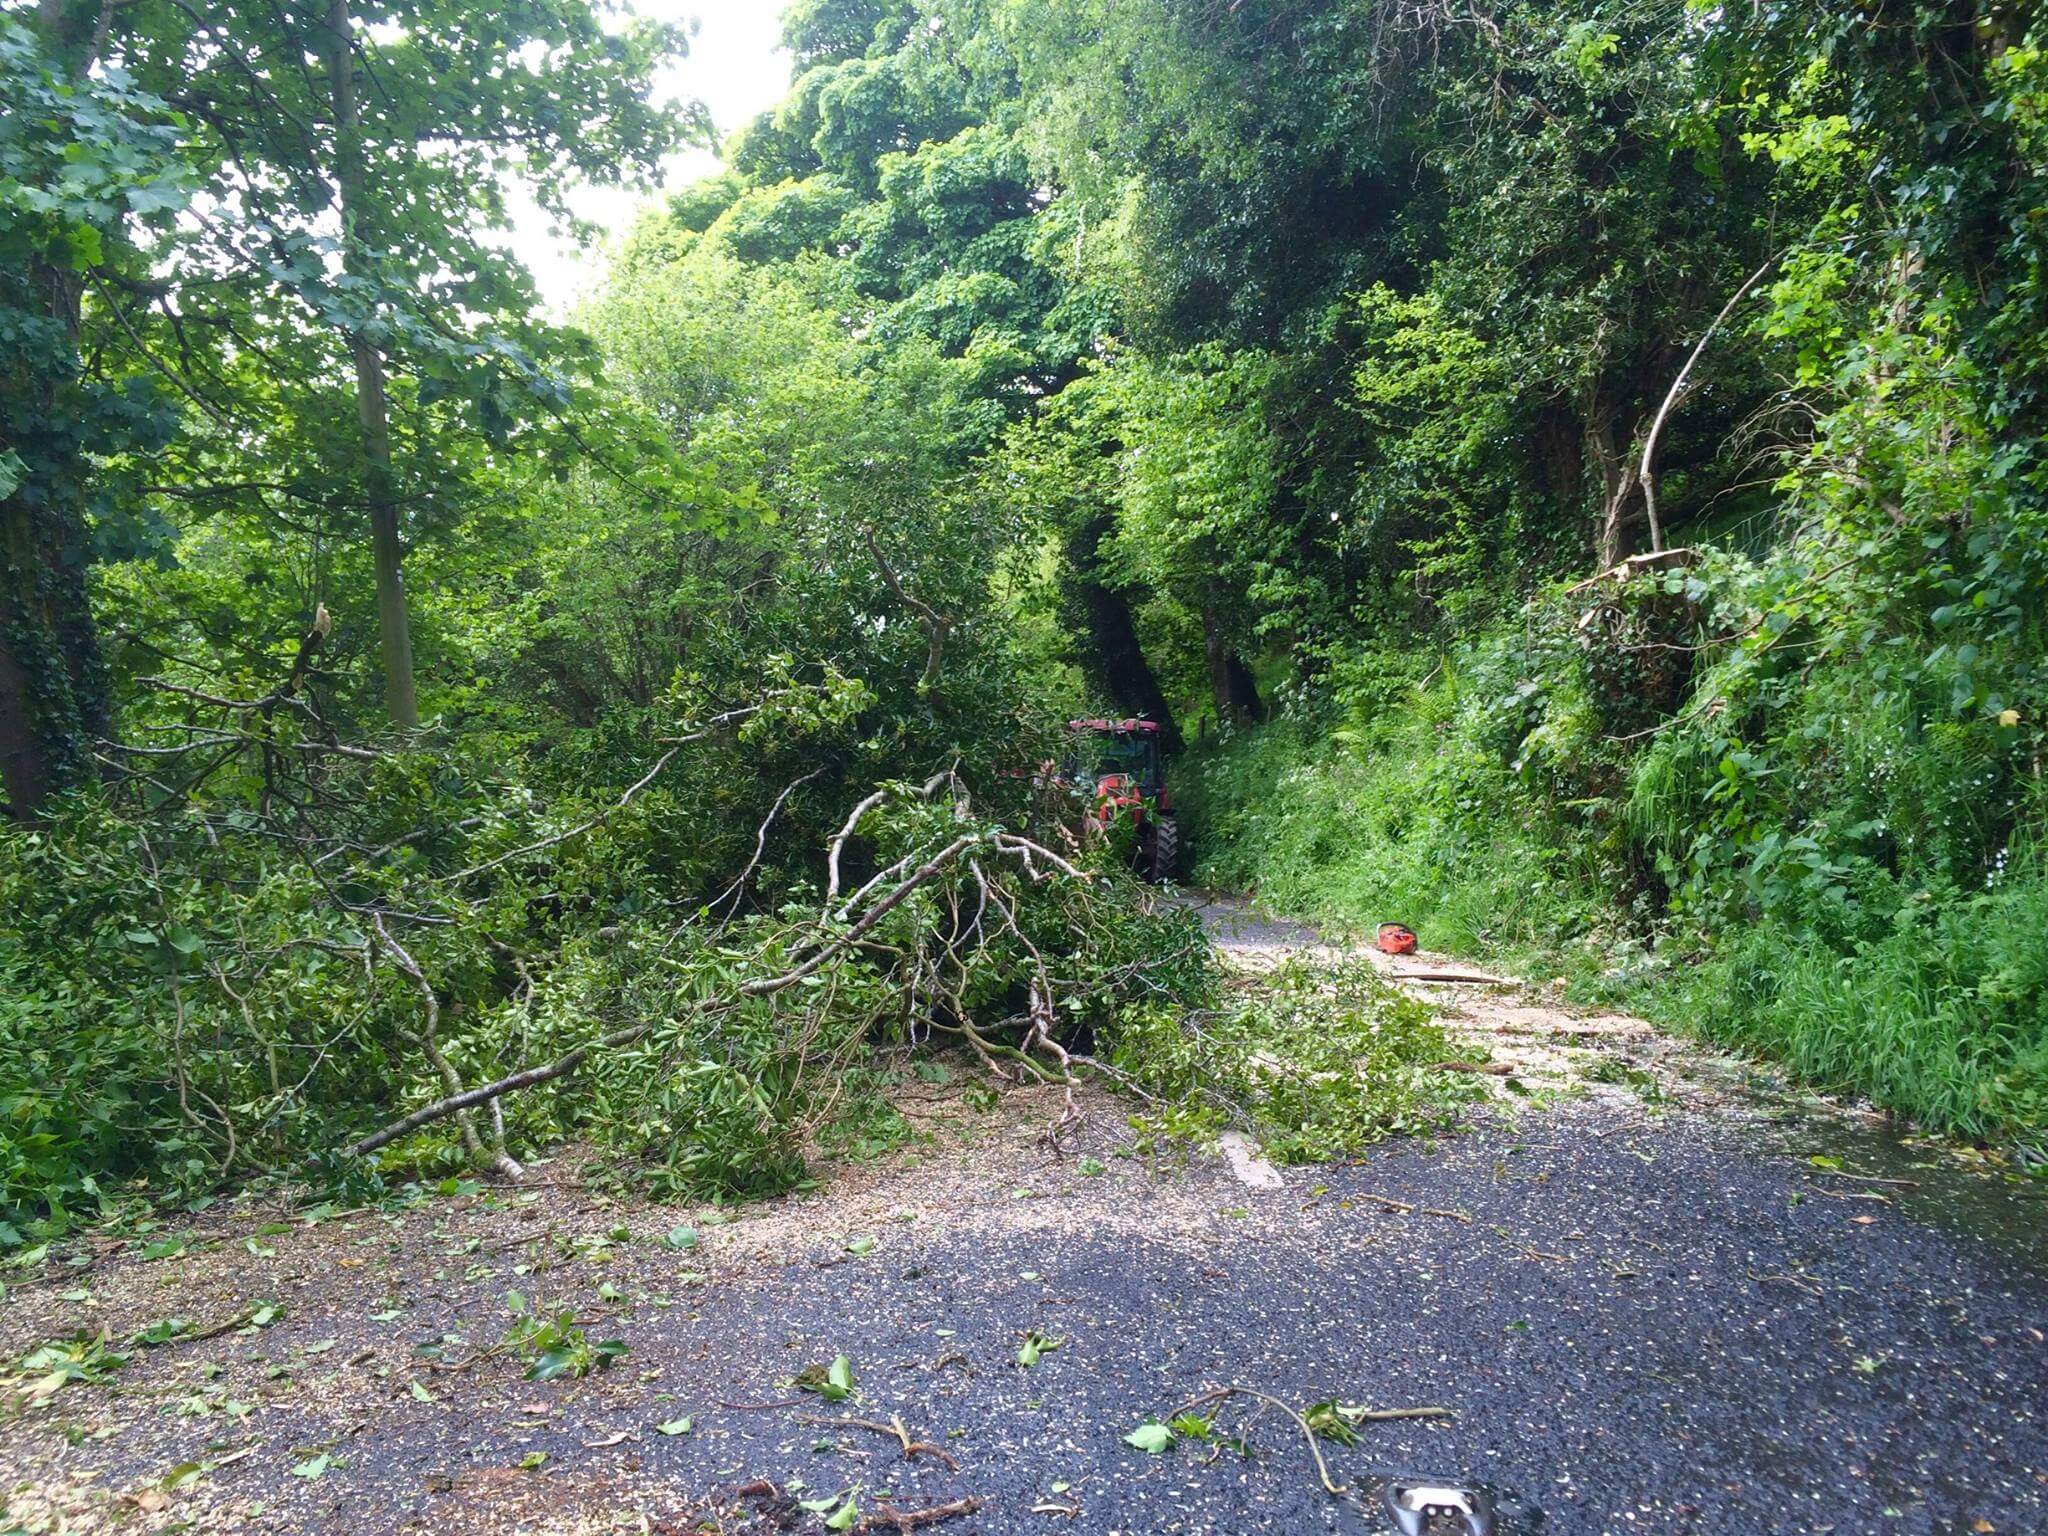 Road closure in Glenshesk with fallen trees, June 2015